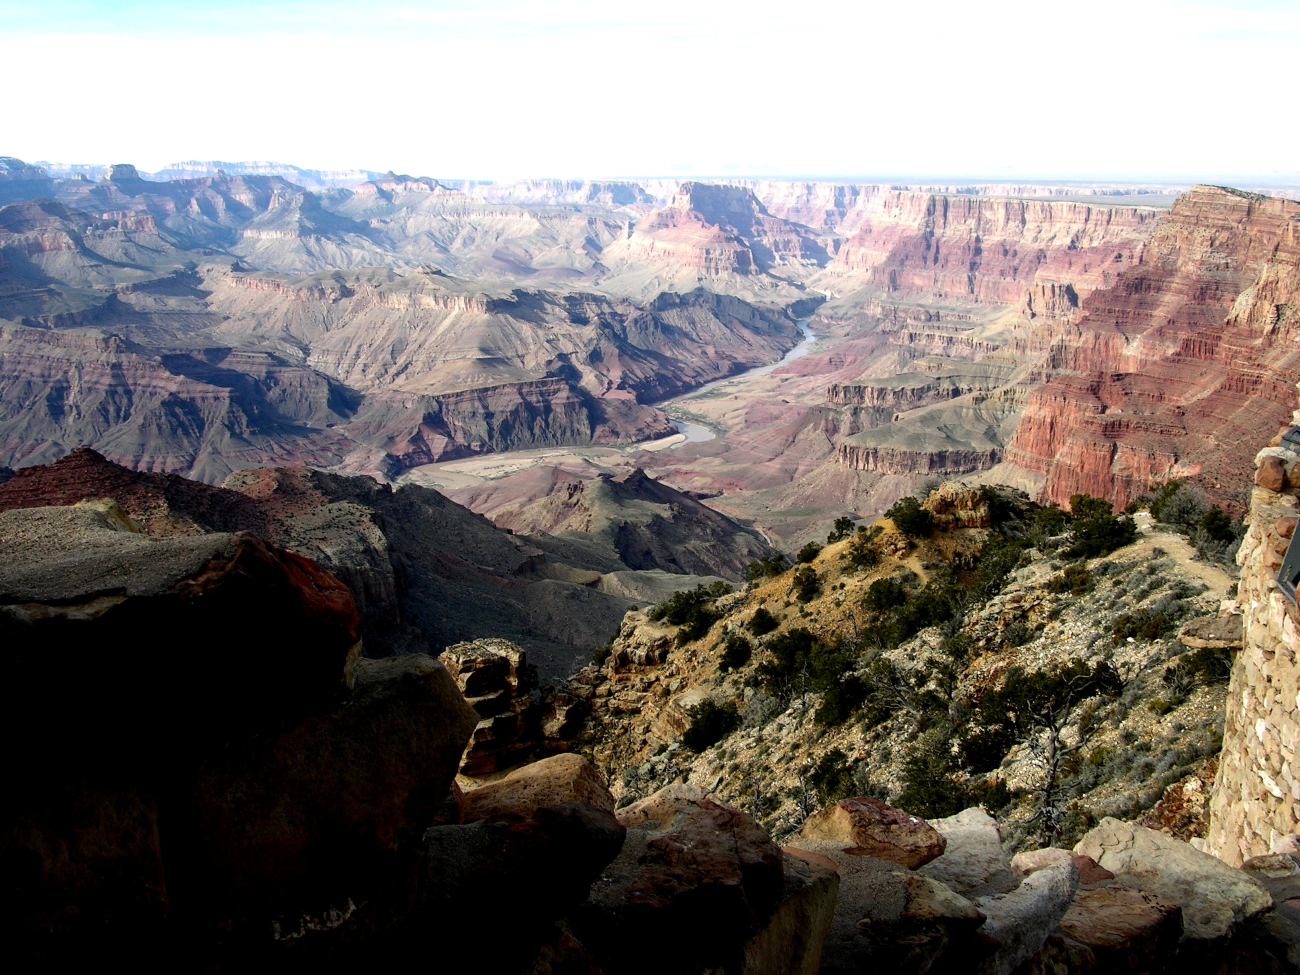 The quintessential view of the Grand Canyon and the Colorado River